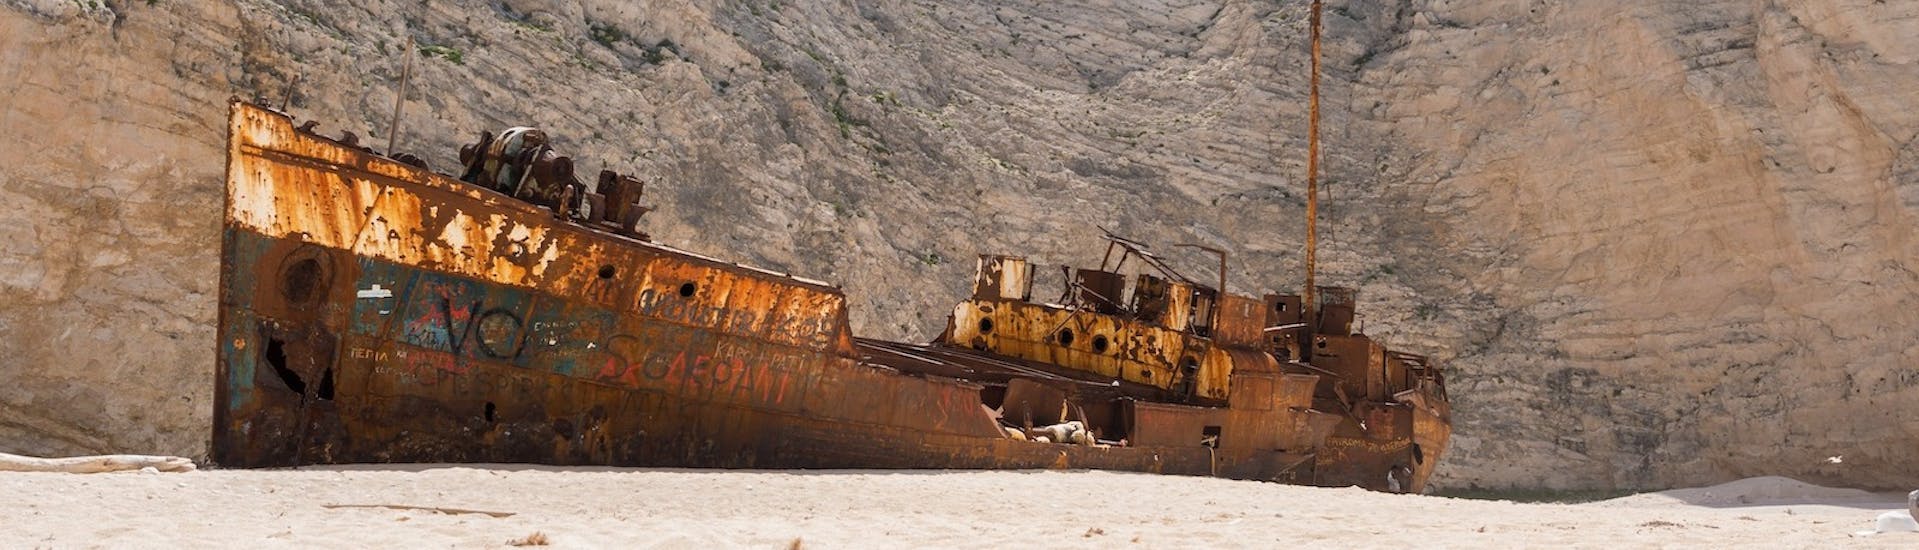 Picture of the famous shipwreck on Navagio Beach, visited during the boat trip to Shipwreck Beach and the Blue Caves with Best of Zante.